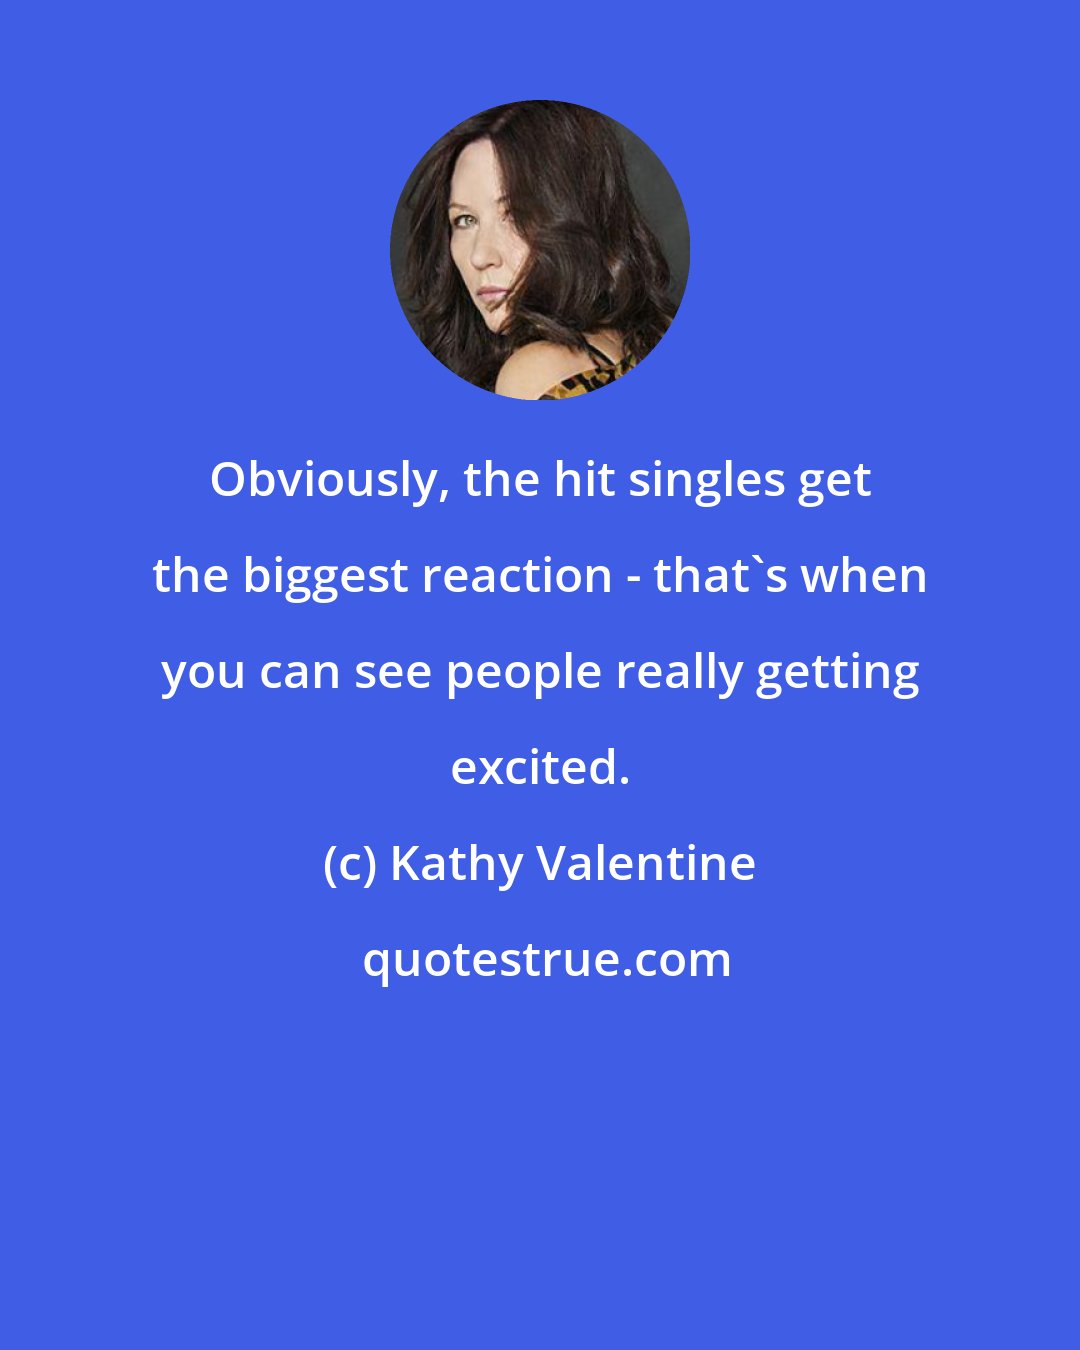 Kathy Valentine: Obviously, the hit singles get the biggest reaction - that's when you can see people really getting excited.